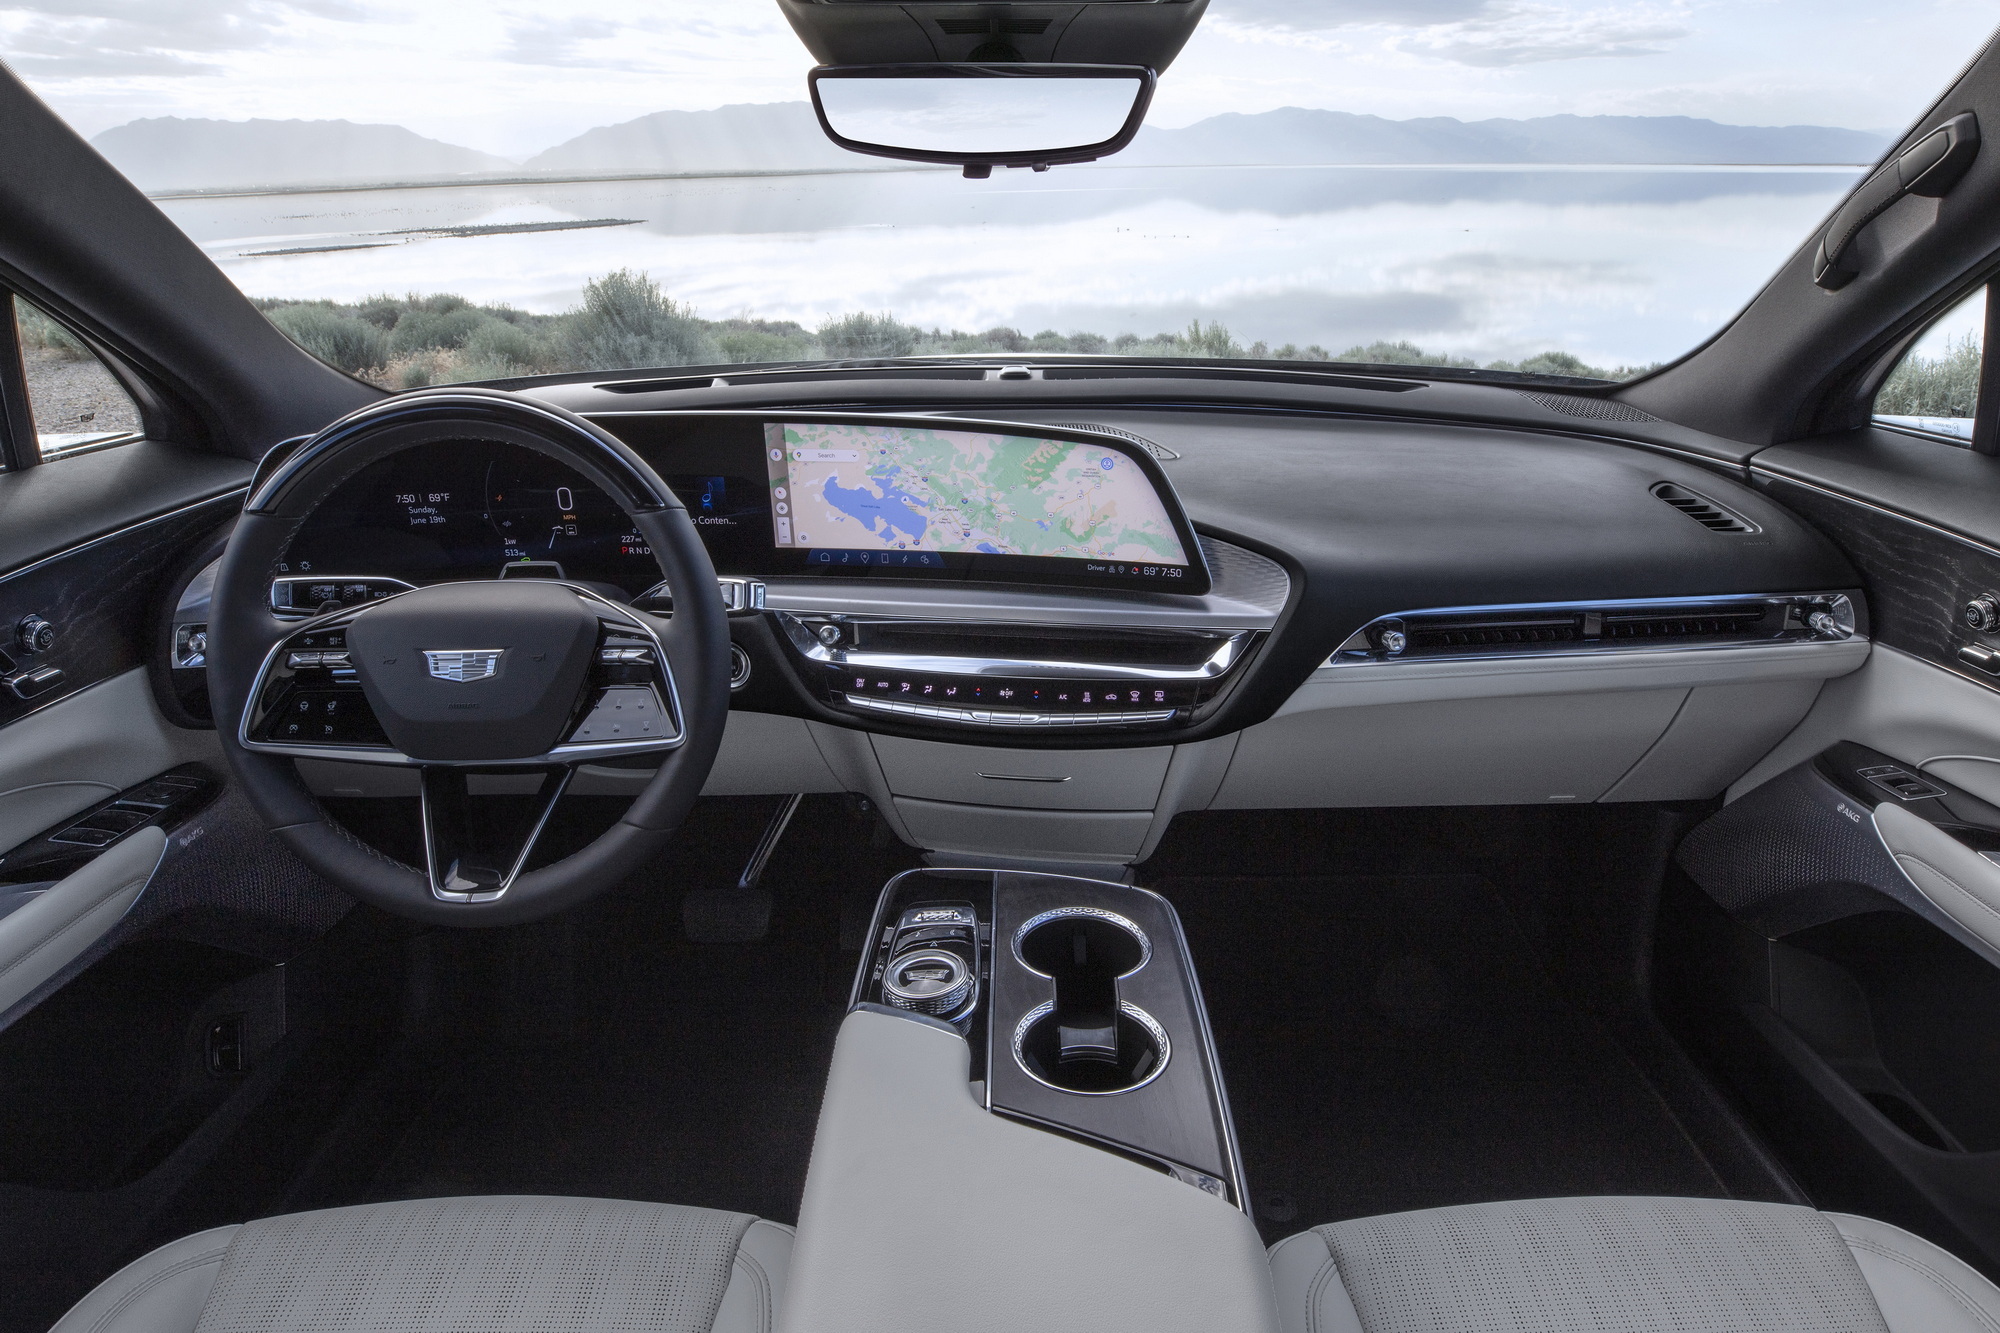 The 10 Best Car Interiors of 2020 Are Almost All in SUVs